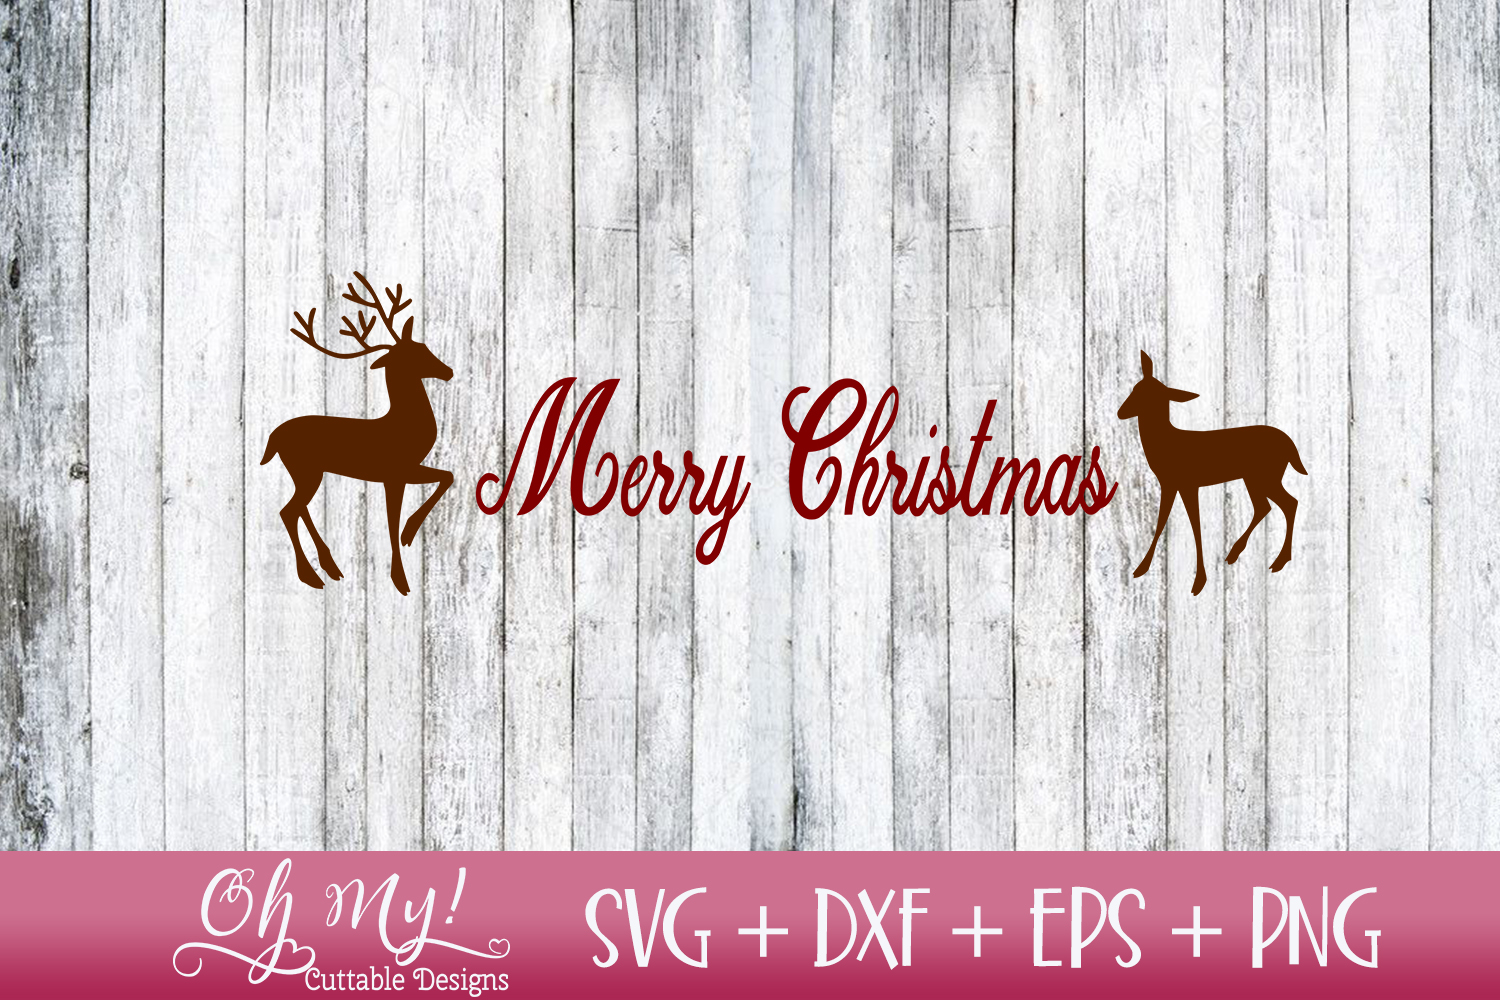 Download Merry Christmas Reindeer - SVG DXF EPS PNG